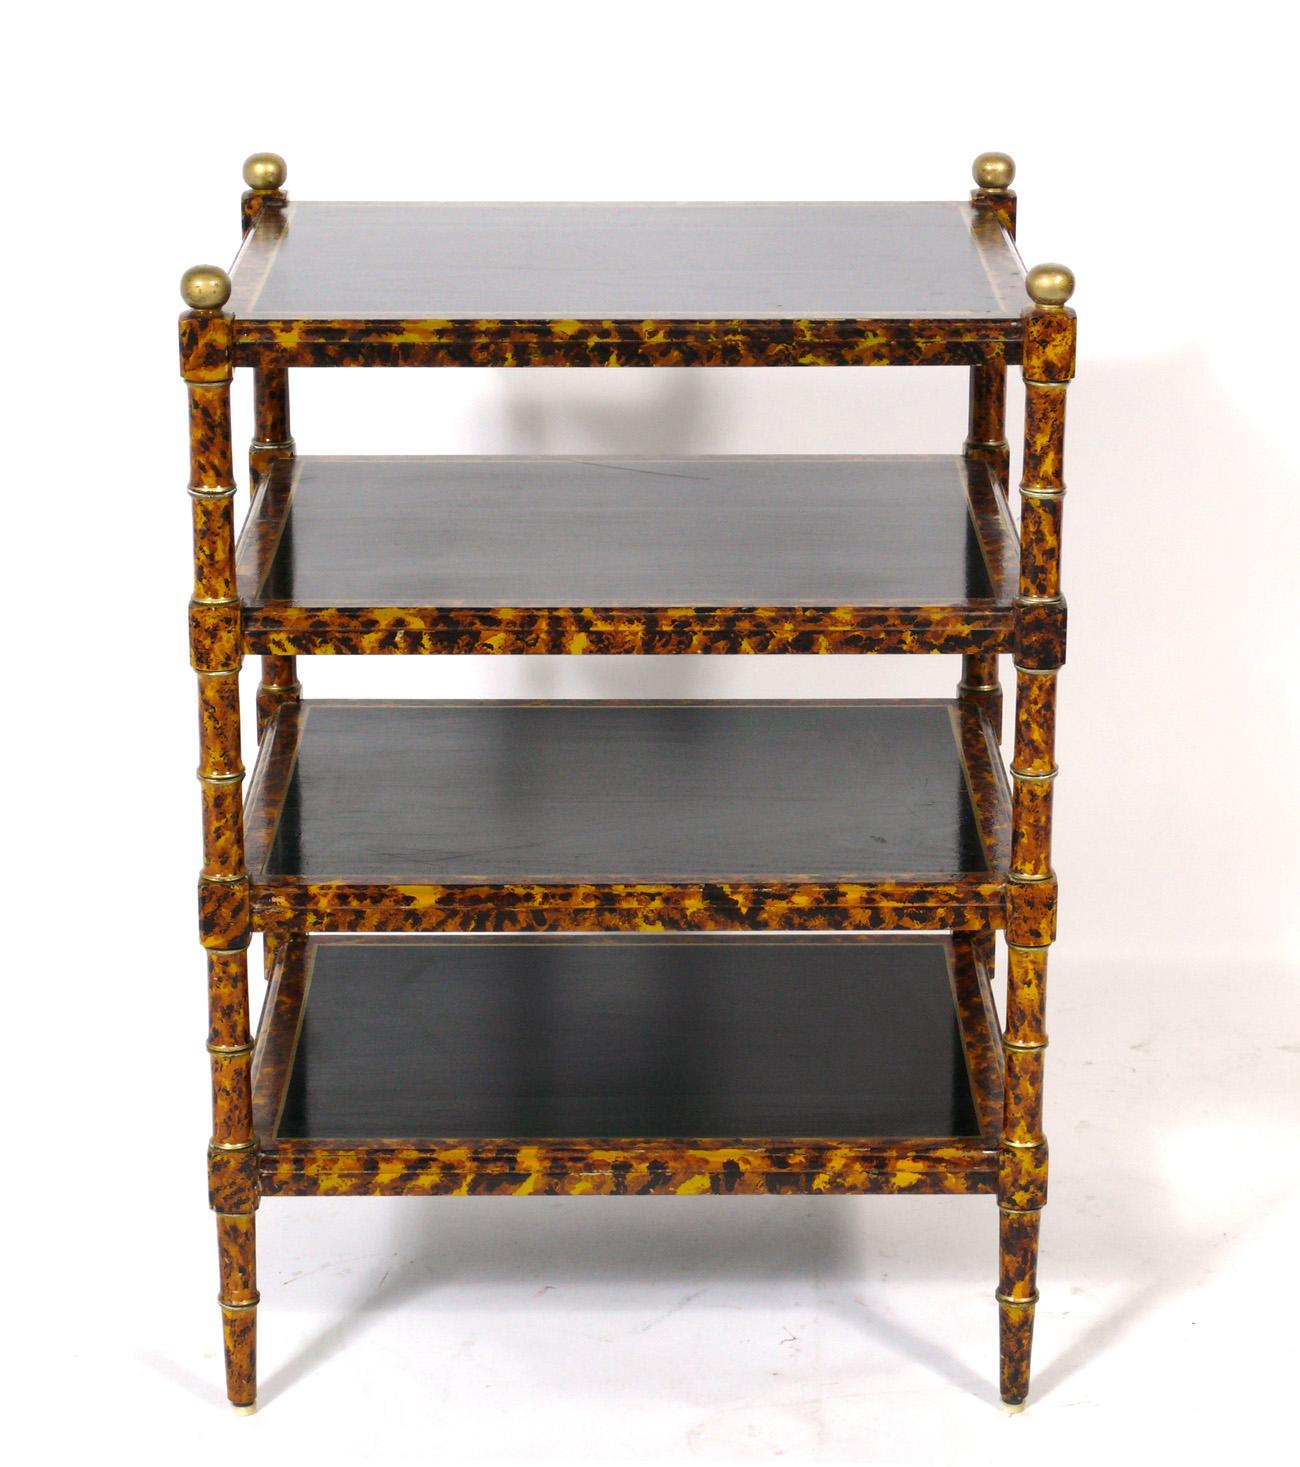 Faux Tortoise hand painted shelf or table, attributed to Maitland Smith, circa 1990s. It is a versatile size and can be used a multi level shelf for extra storage in a home office or vanity area, or as an end table, side table or night stand.